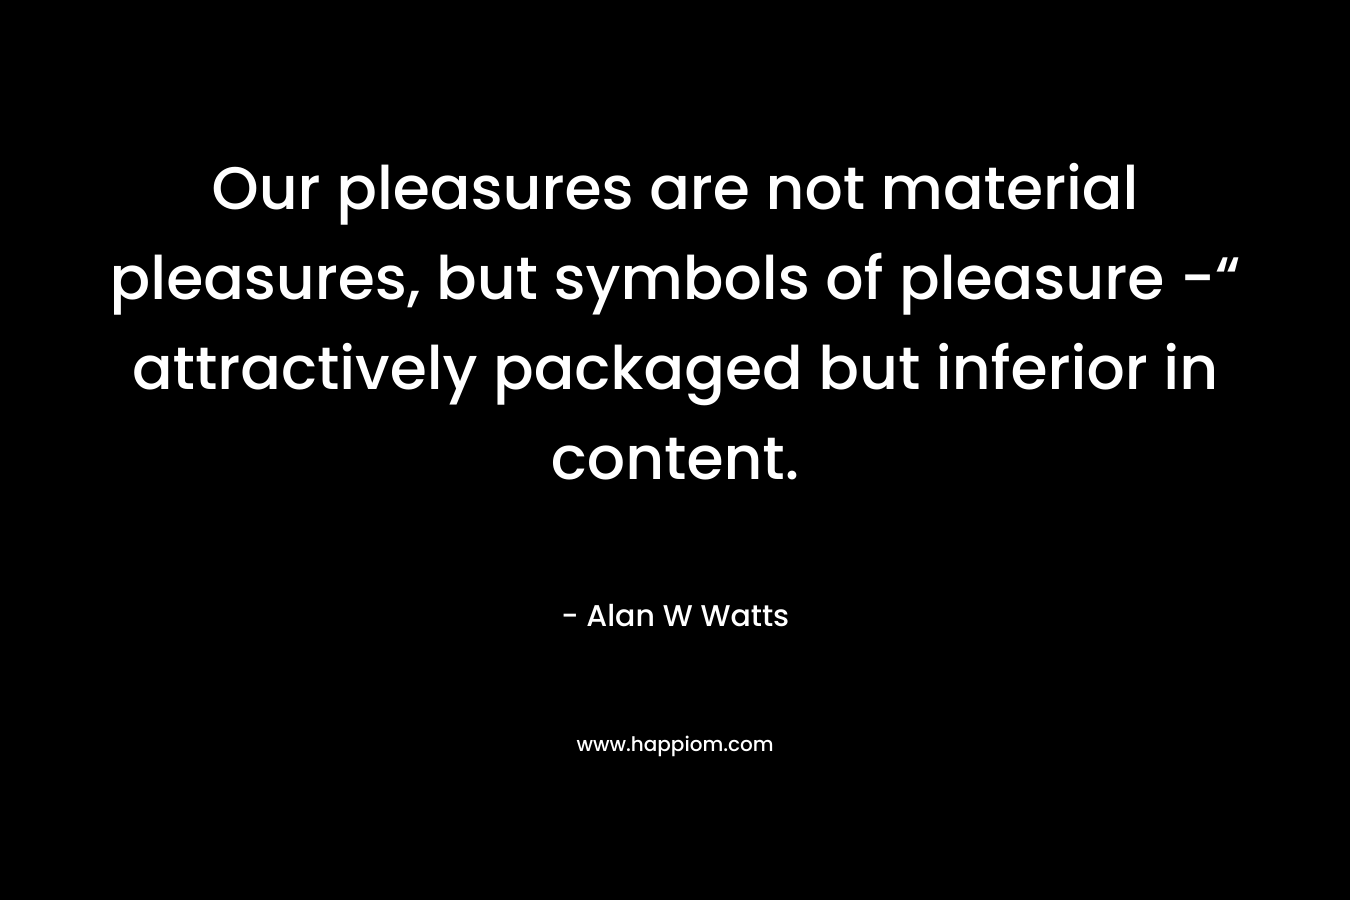 Our pleasures are not material pleasures, but symbols of pleasure -“ attractively packaged but inferior in content.